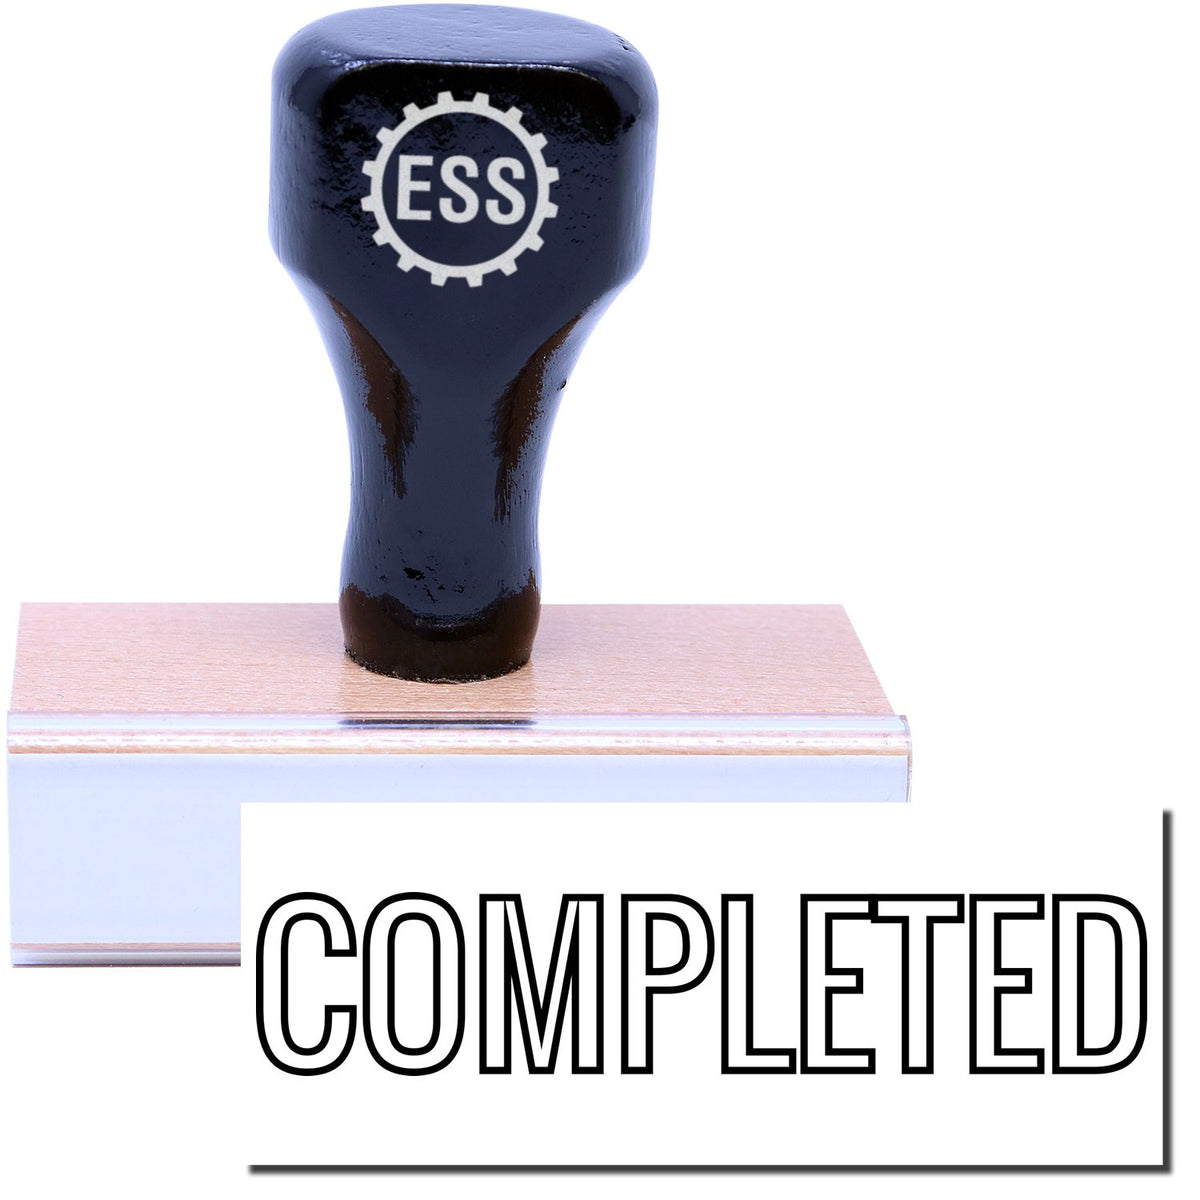 A stock office rubber stamp with a stamped image showing how the text &quot;COMPLETED&quot; in a large outline font is displayed after stamping.